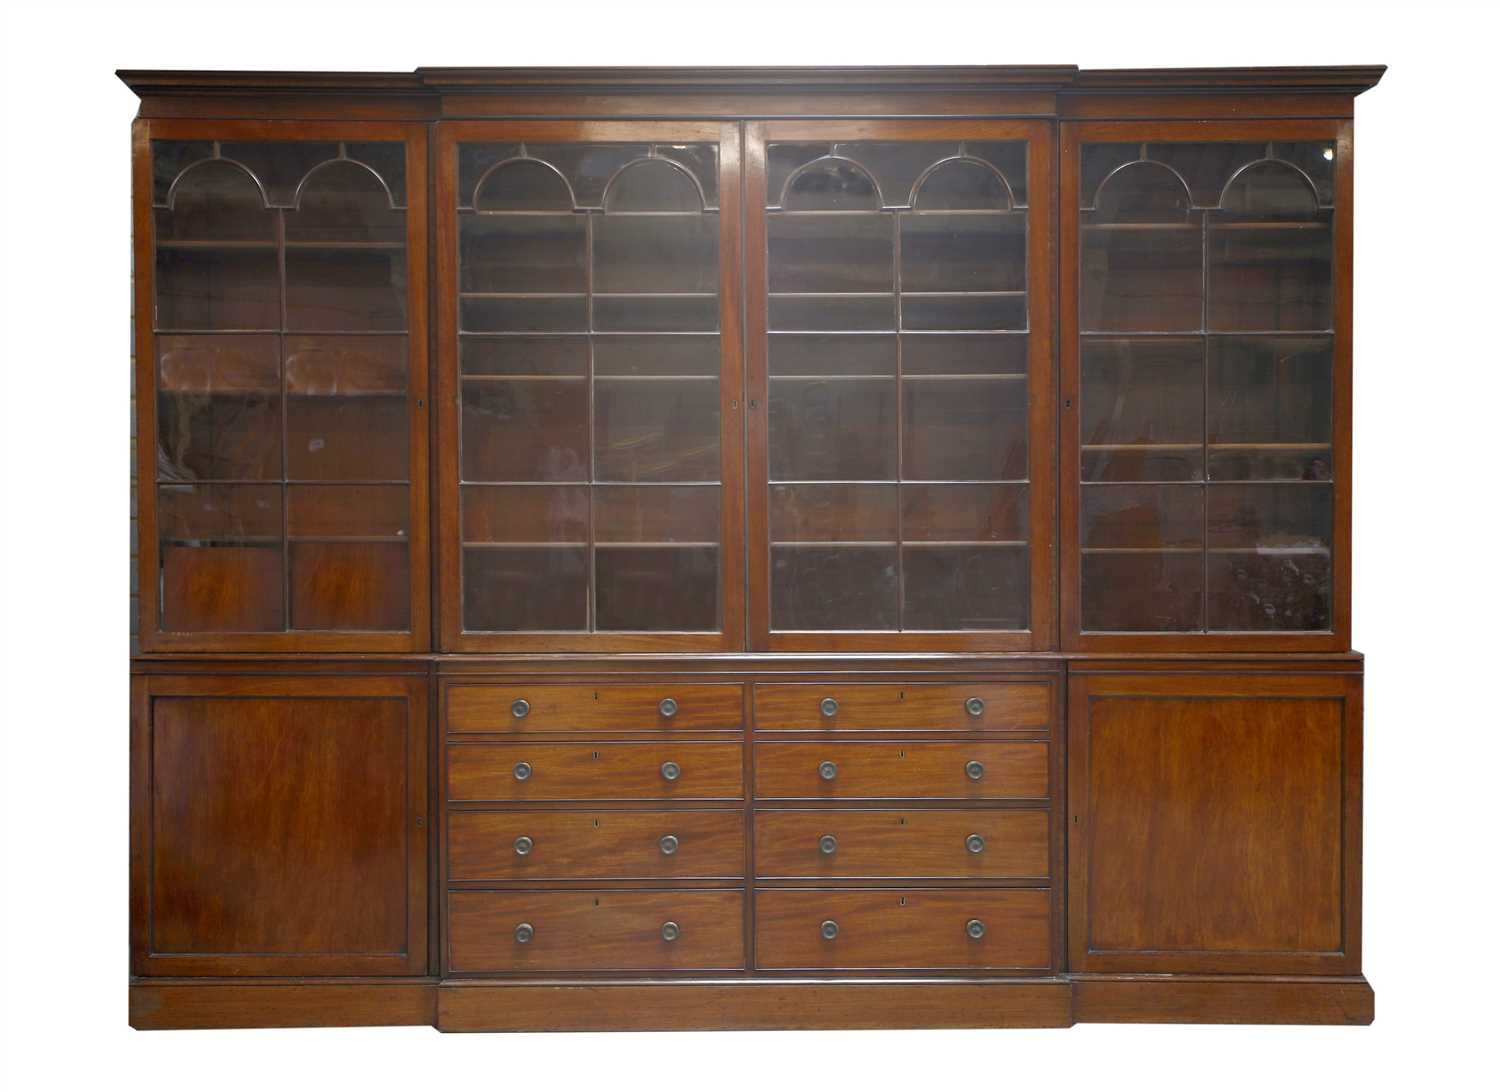 Lot 130 - A George III-style mahogany breakfront bookcase